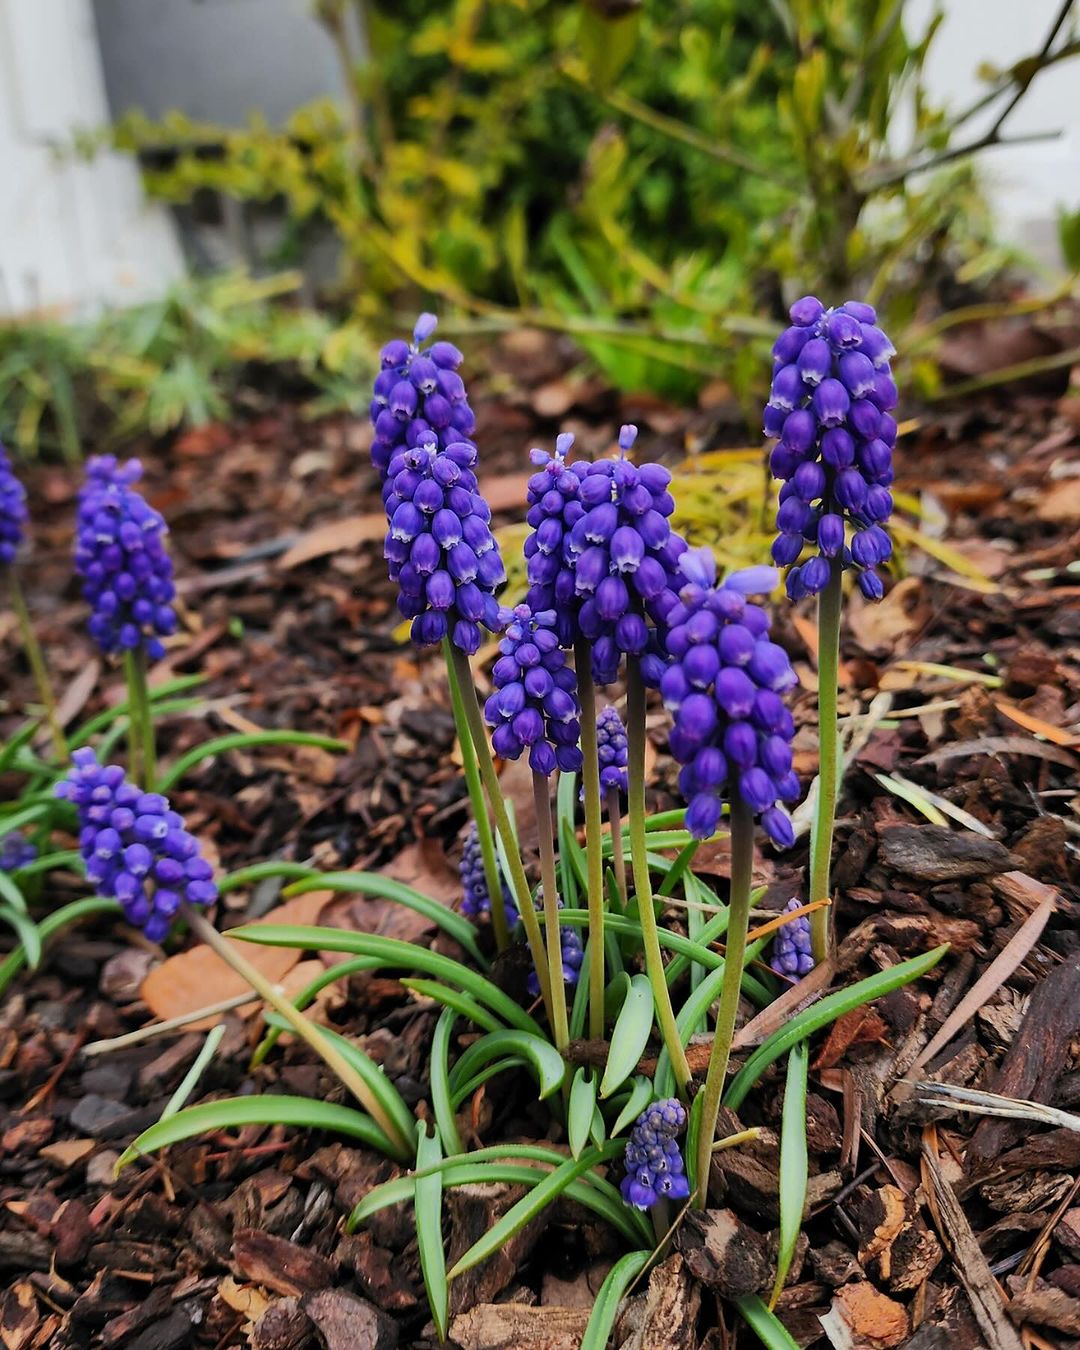 Purple Grape Hyacinth flowers bloom near a house, adding a vibrant touch to the ground.